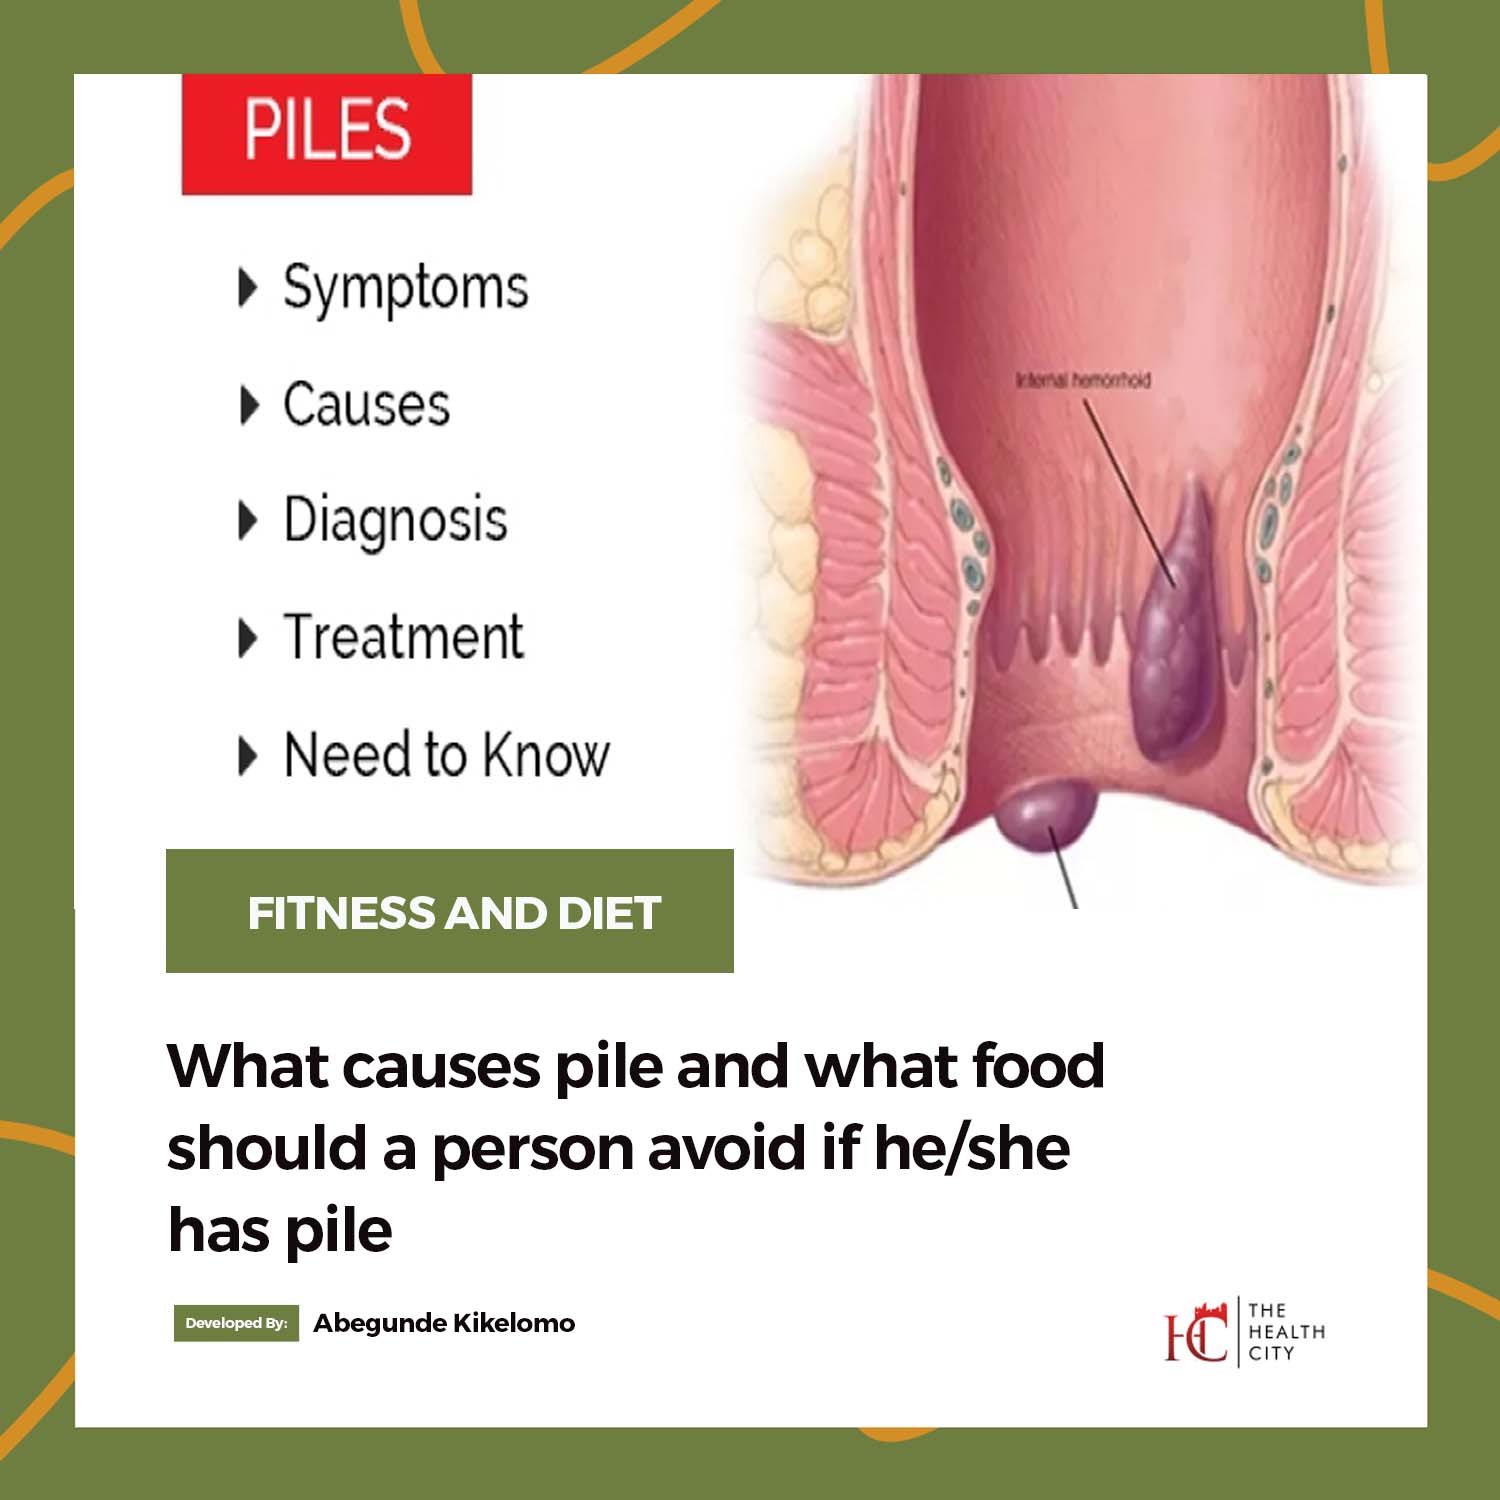 The Health City - What Causes Pile And What Food Should A Person